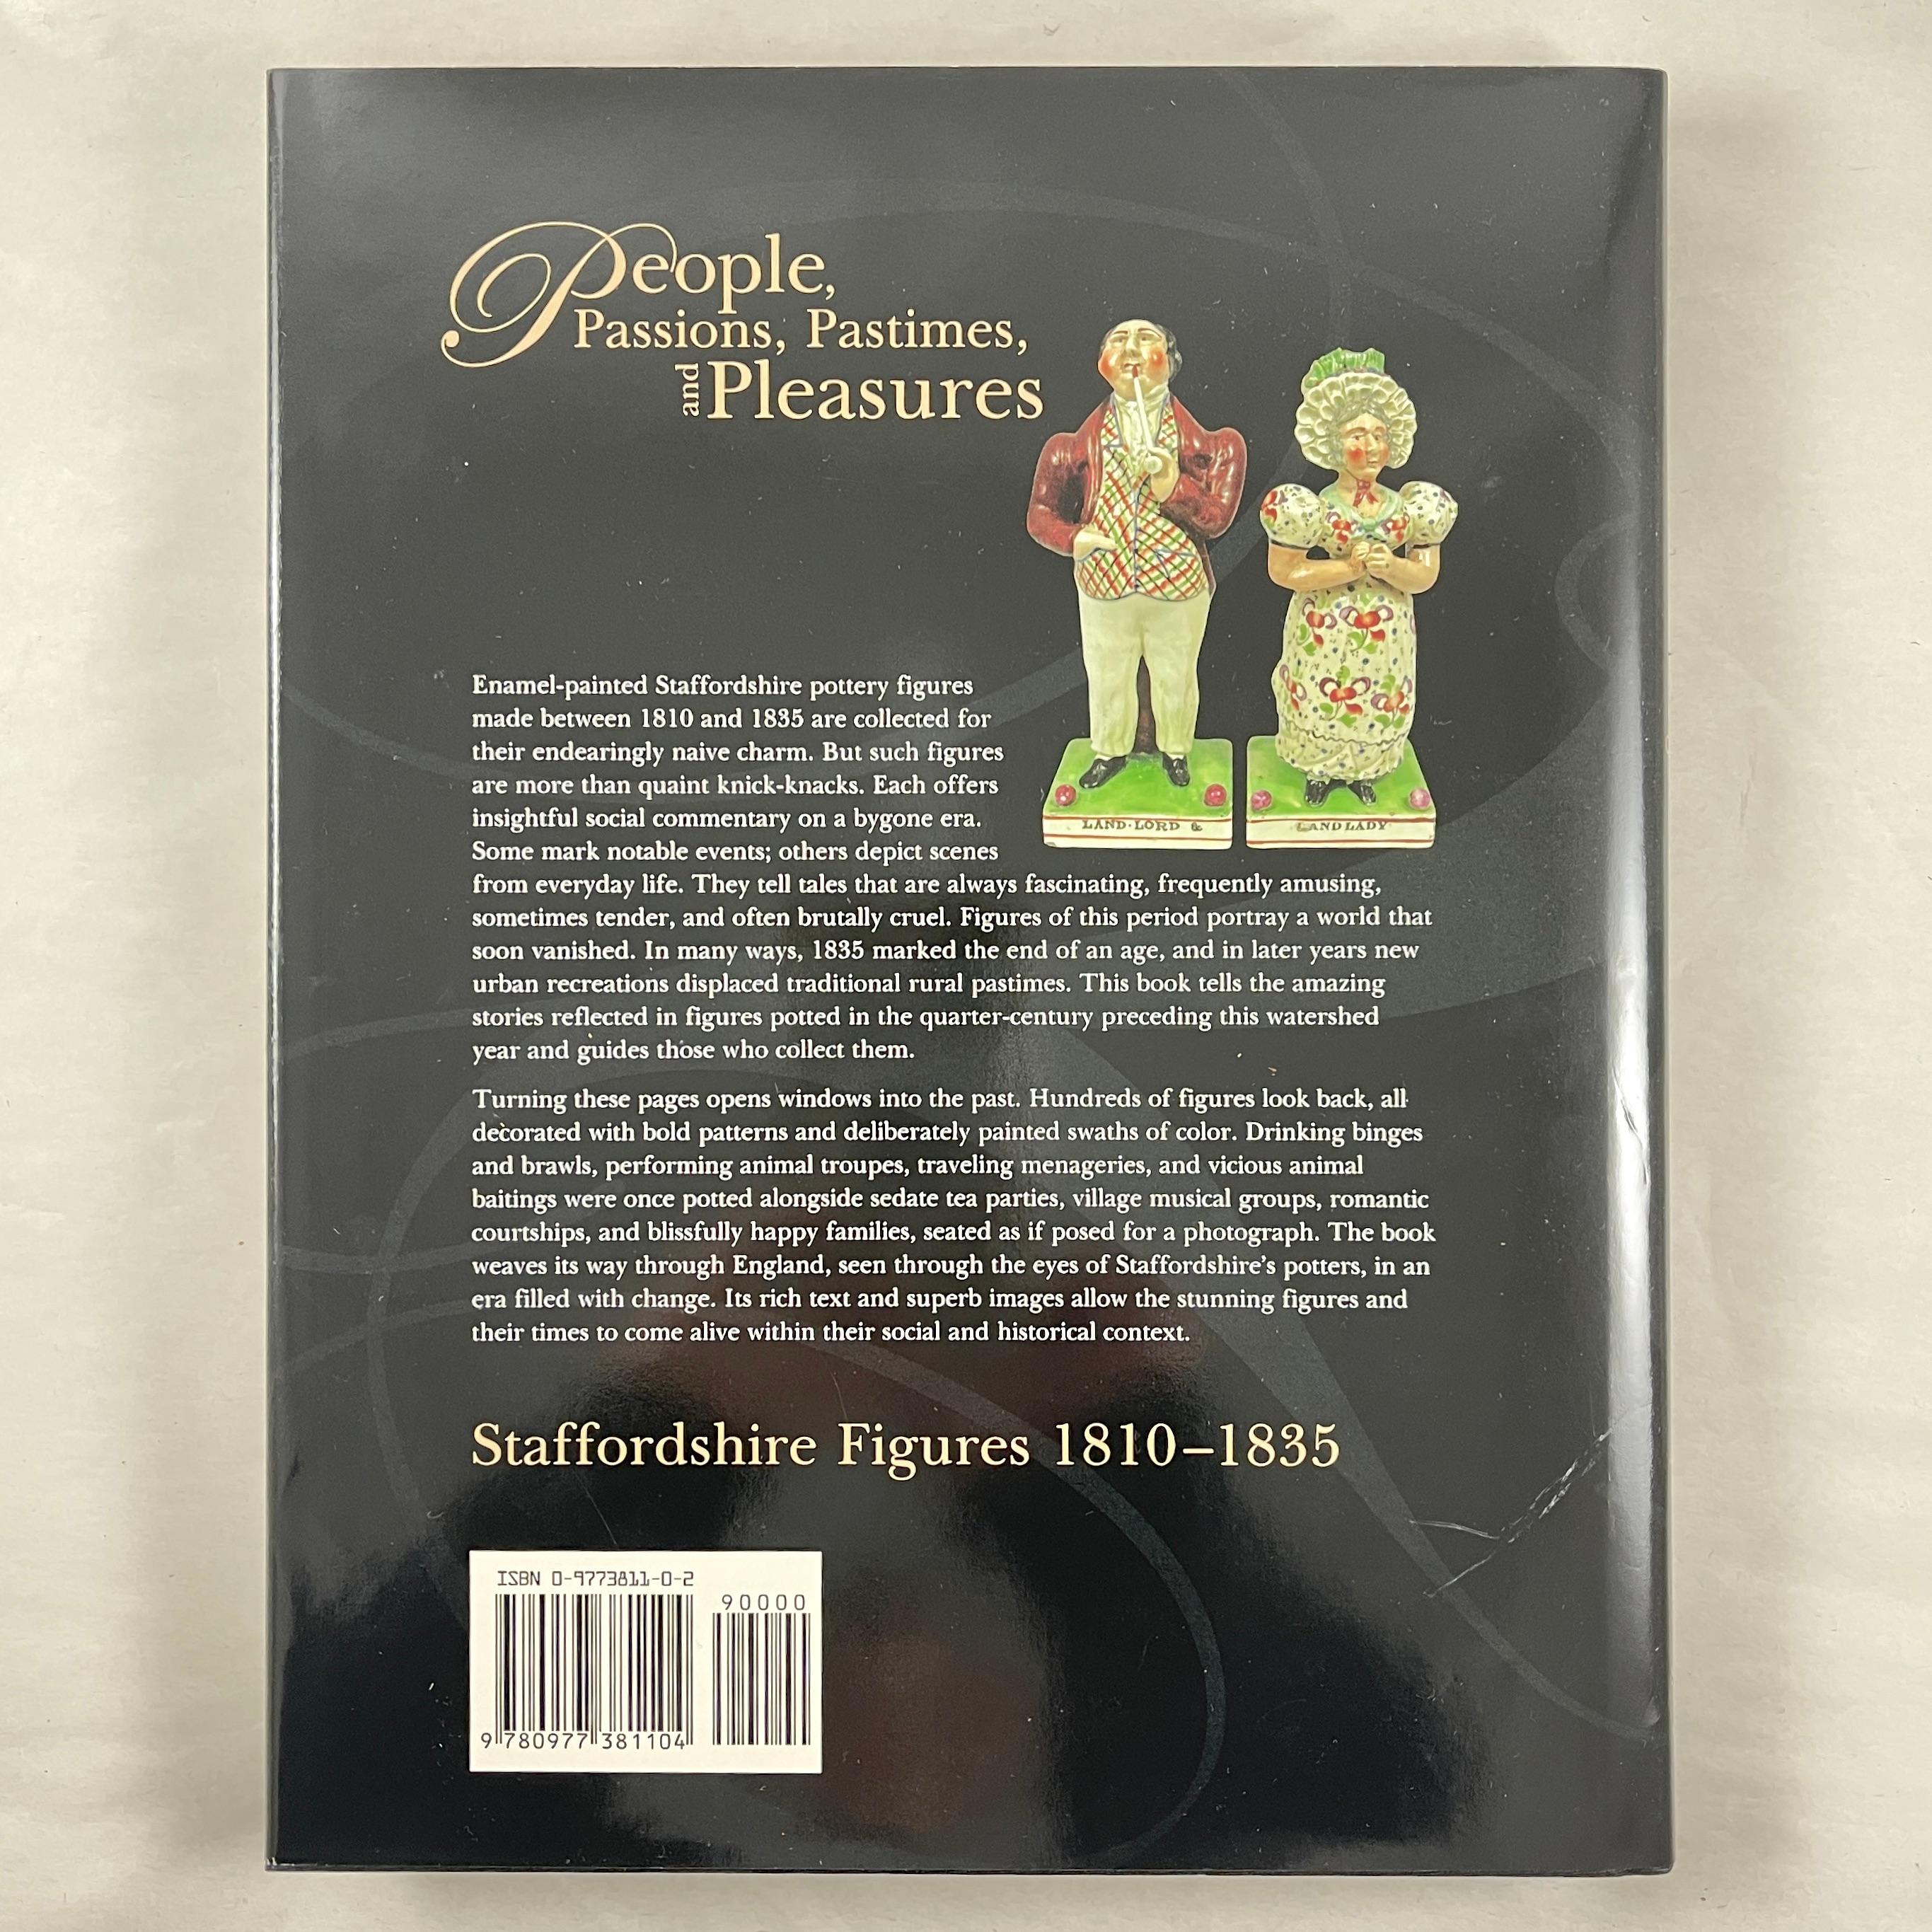 American People, Passions, Pastimes, and Pleasures: Staffordshire Figures, 1810-1835  For Sale